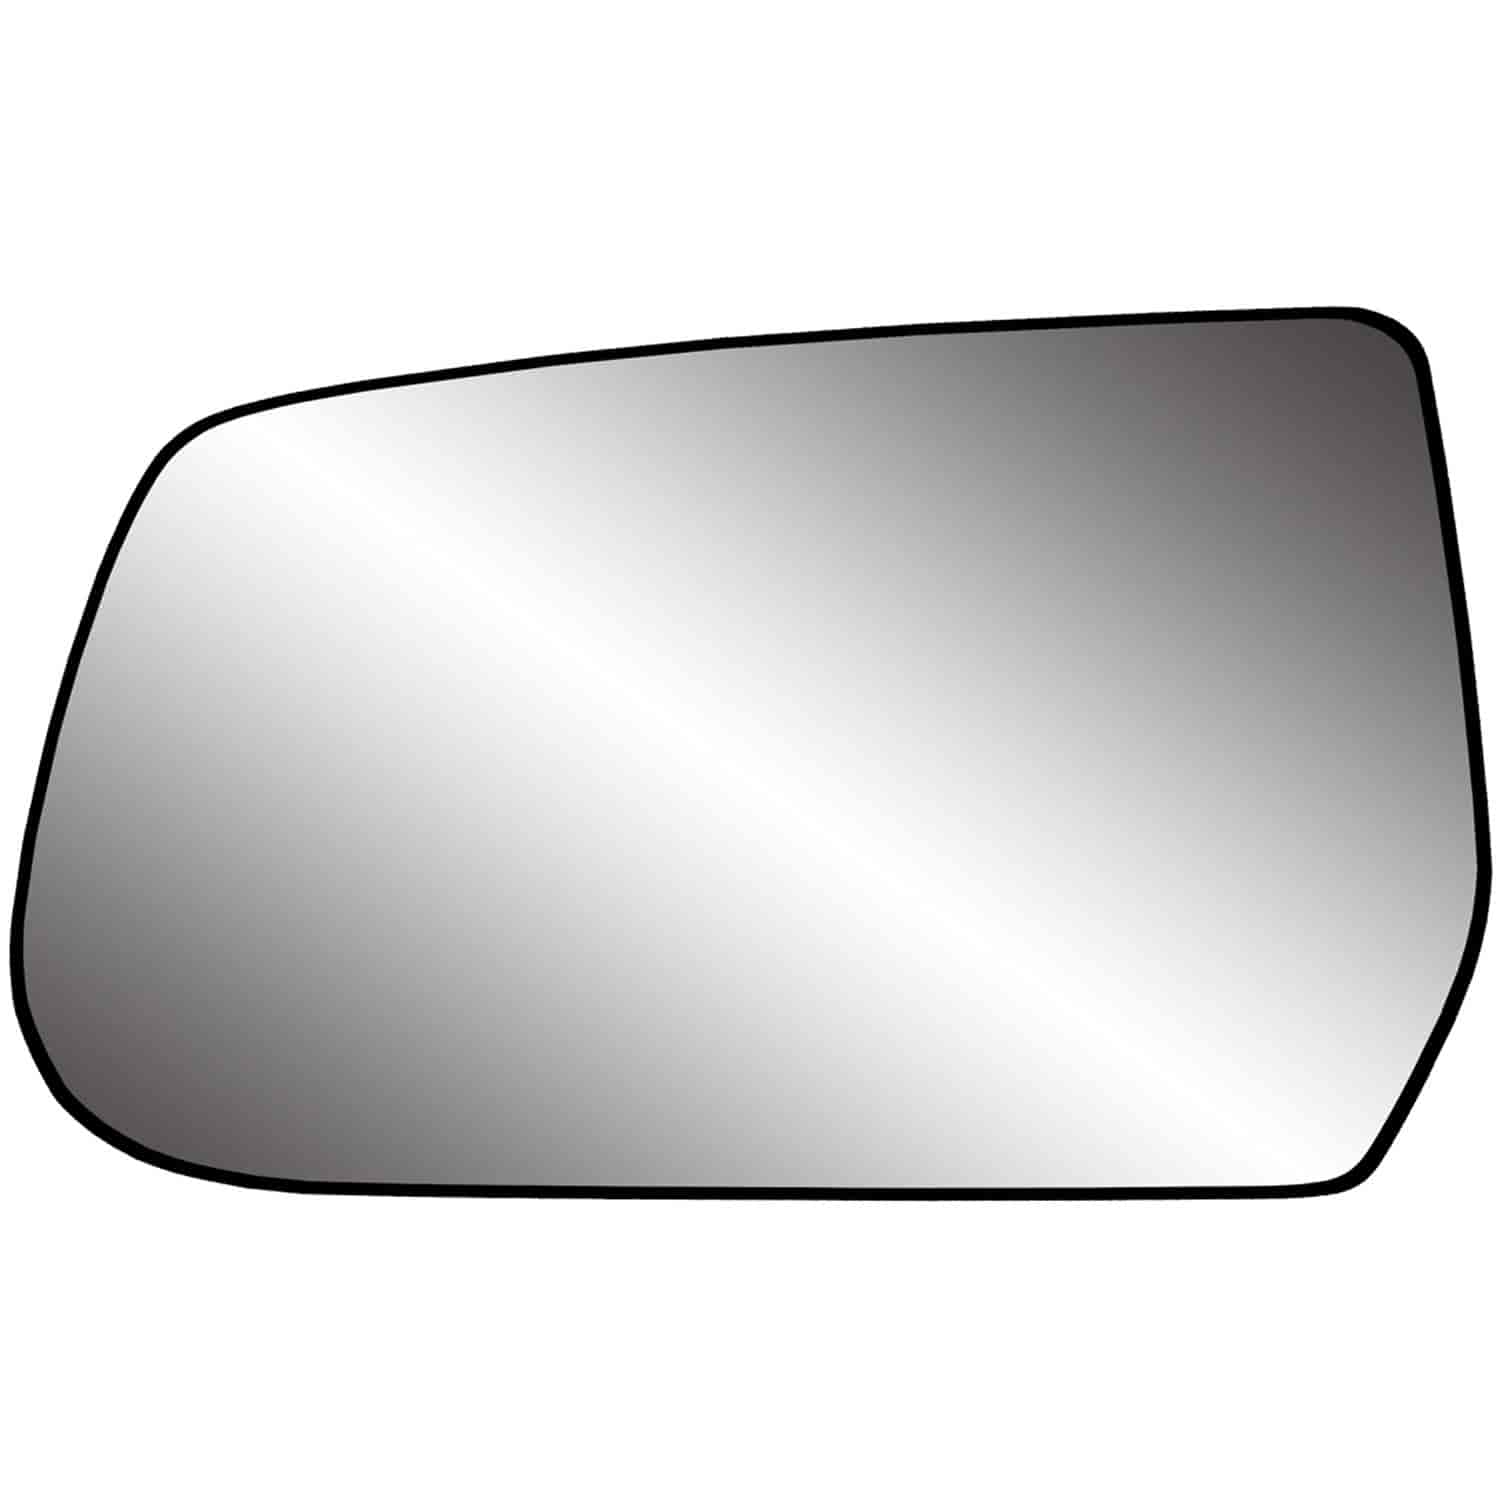 Replacement Glass Assembly for 10-14 Equinox w/o Blind Spot lens; 10-14 Terrain w/o Blind Spot lens